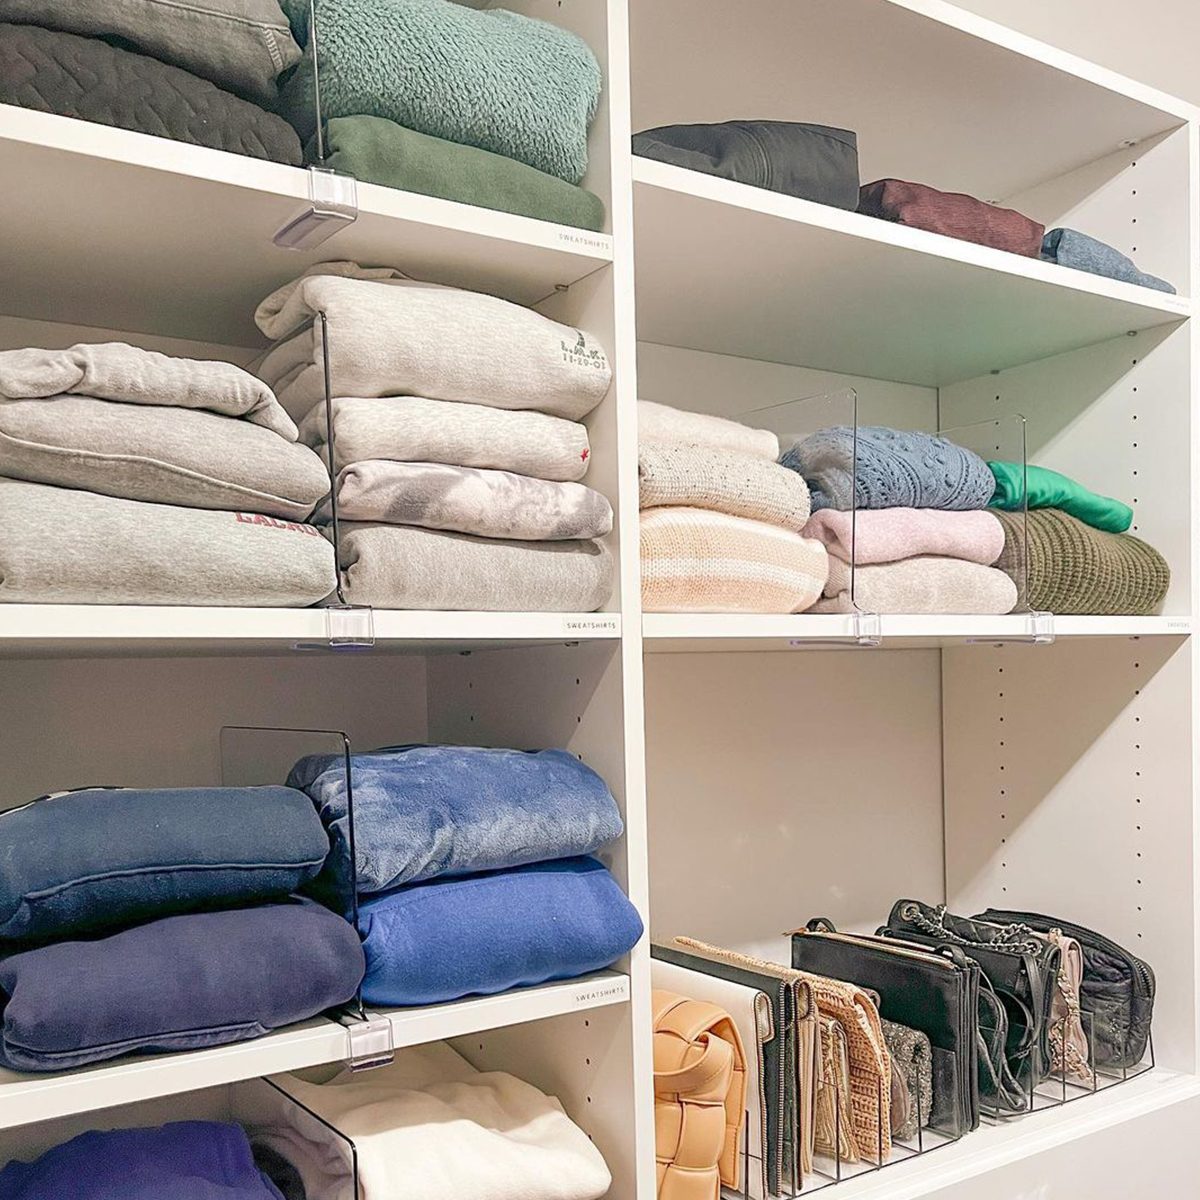 10 Bedroom Closet Ideas To Optimize Your Space Shelf Dividers Courtesy @organizing.engineers